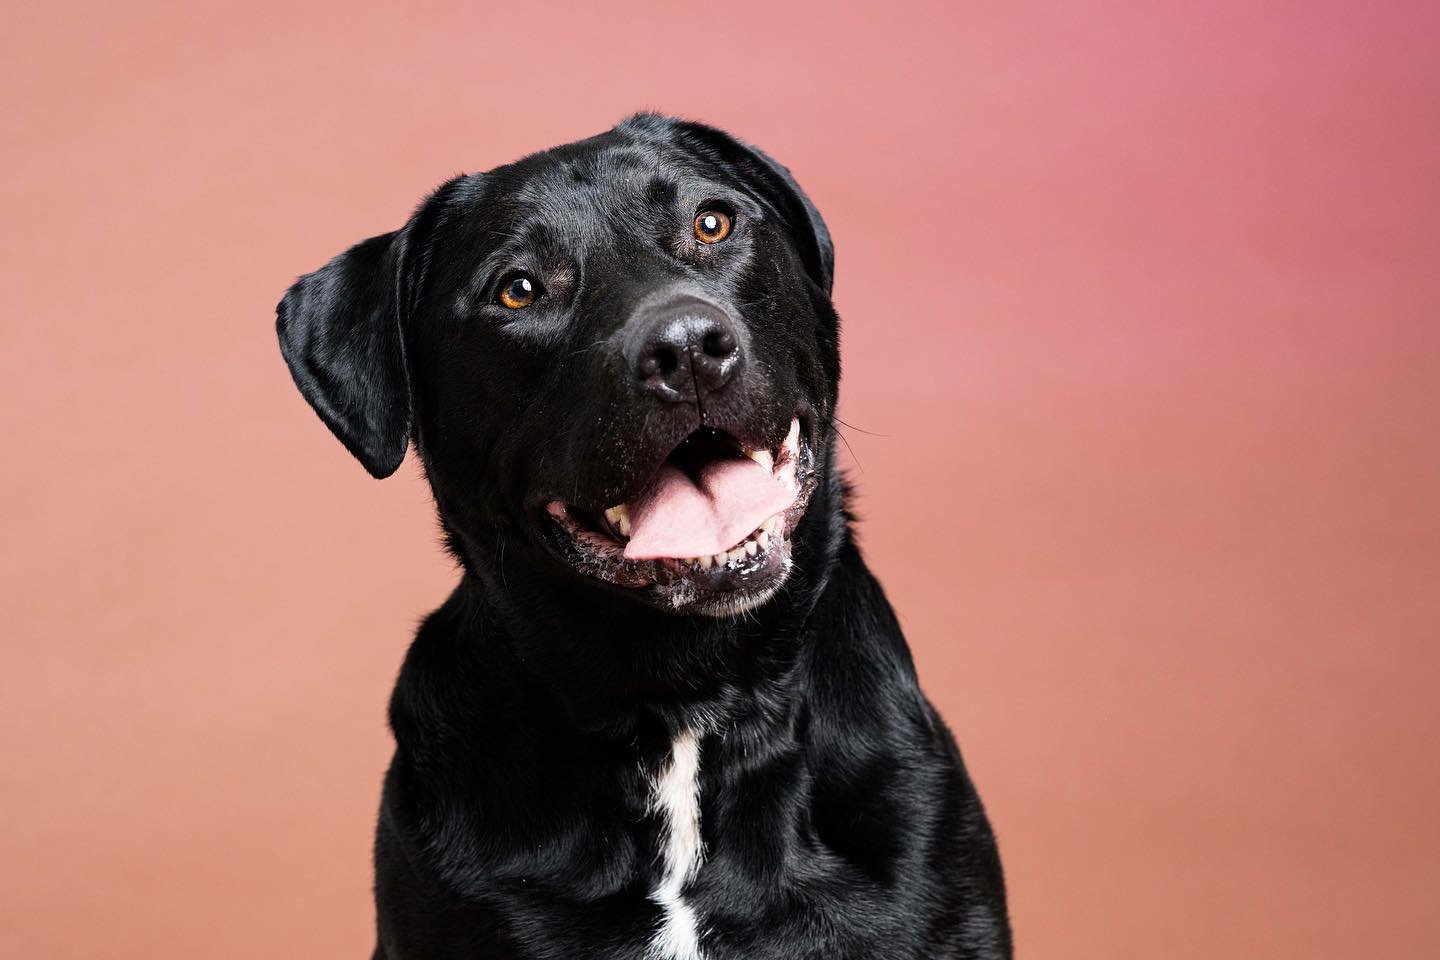 People seem to be intimidated by big black dogs&hellip; maybe that&rsquo;s why Remi still hasn&rsquo;t found a home. Be real though&hellip; how could a dog capable of that second face intimidate anyone? 🥹

Remi is being fostered by @plannedpethoodto